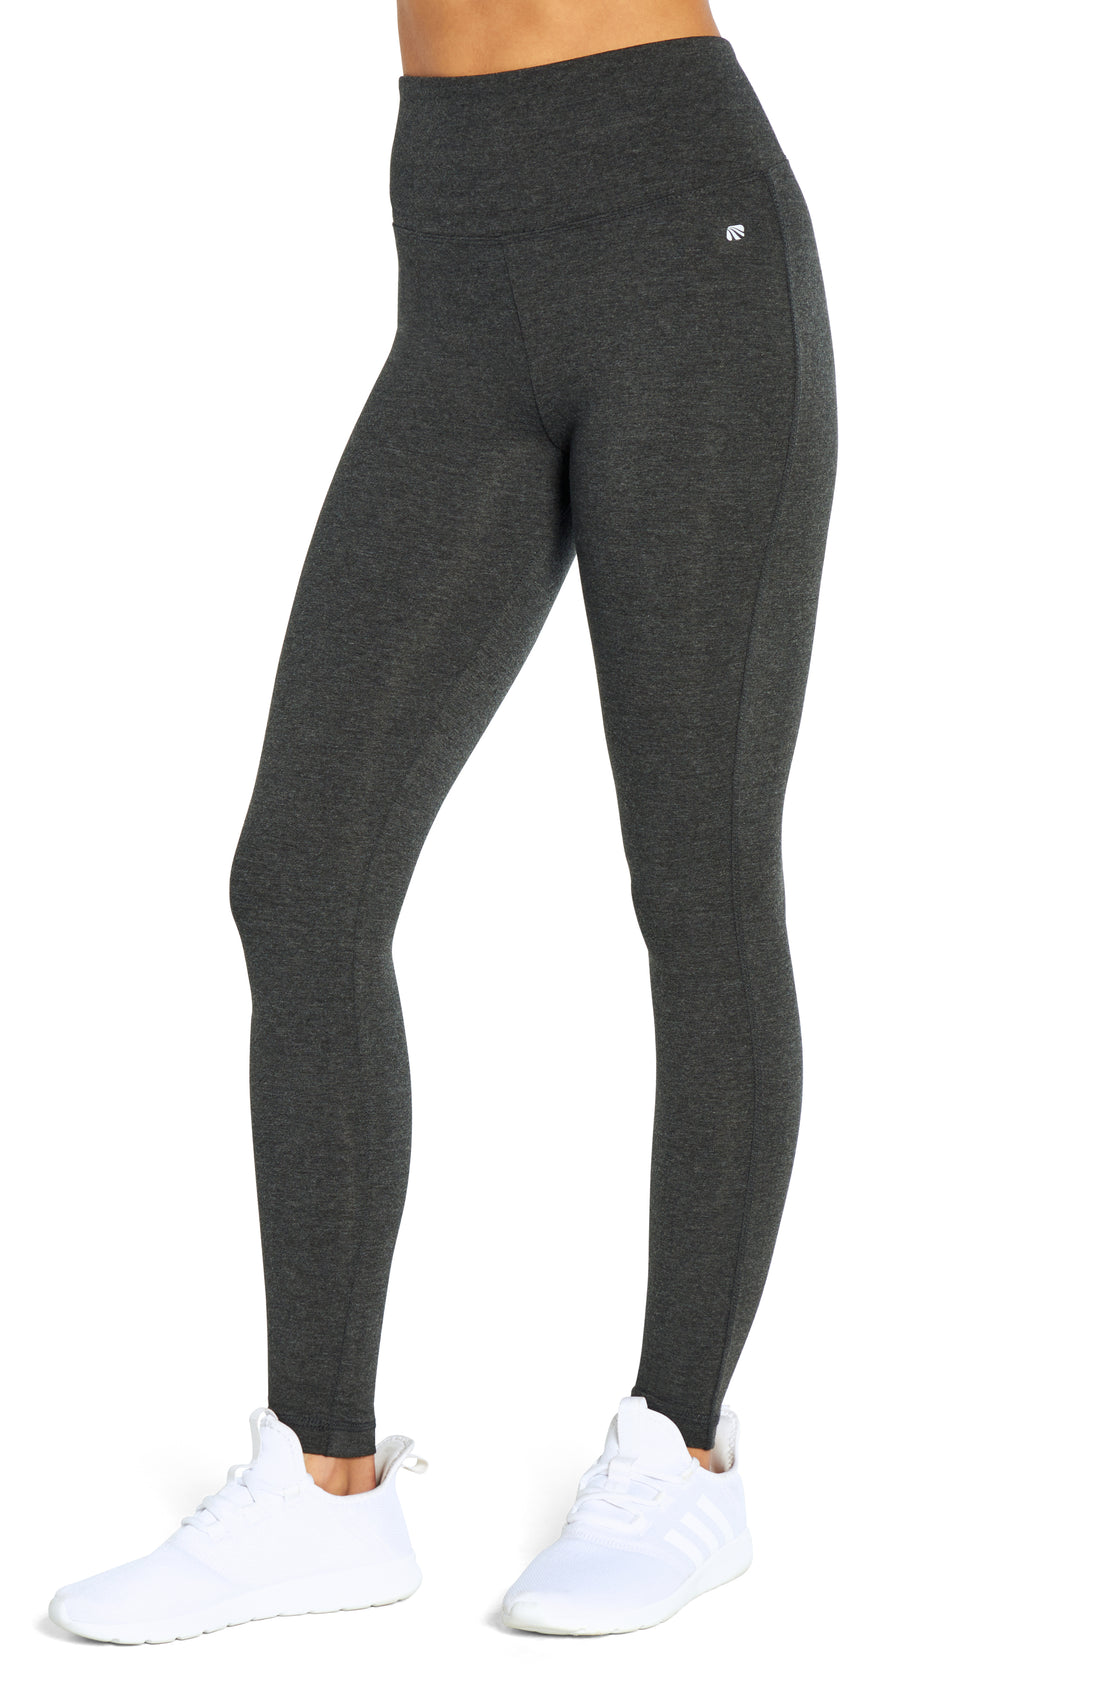 Marika Women's Carrie Tummy Control Legging, Heather Charcoal, - Import It  All